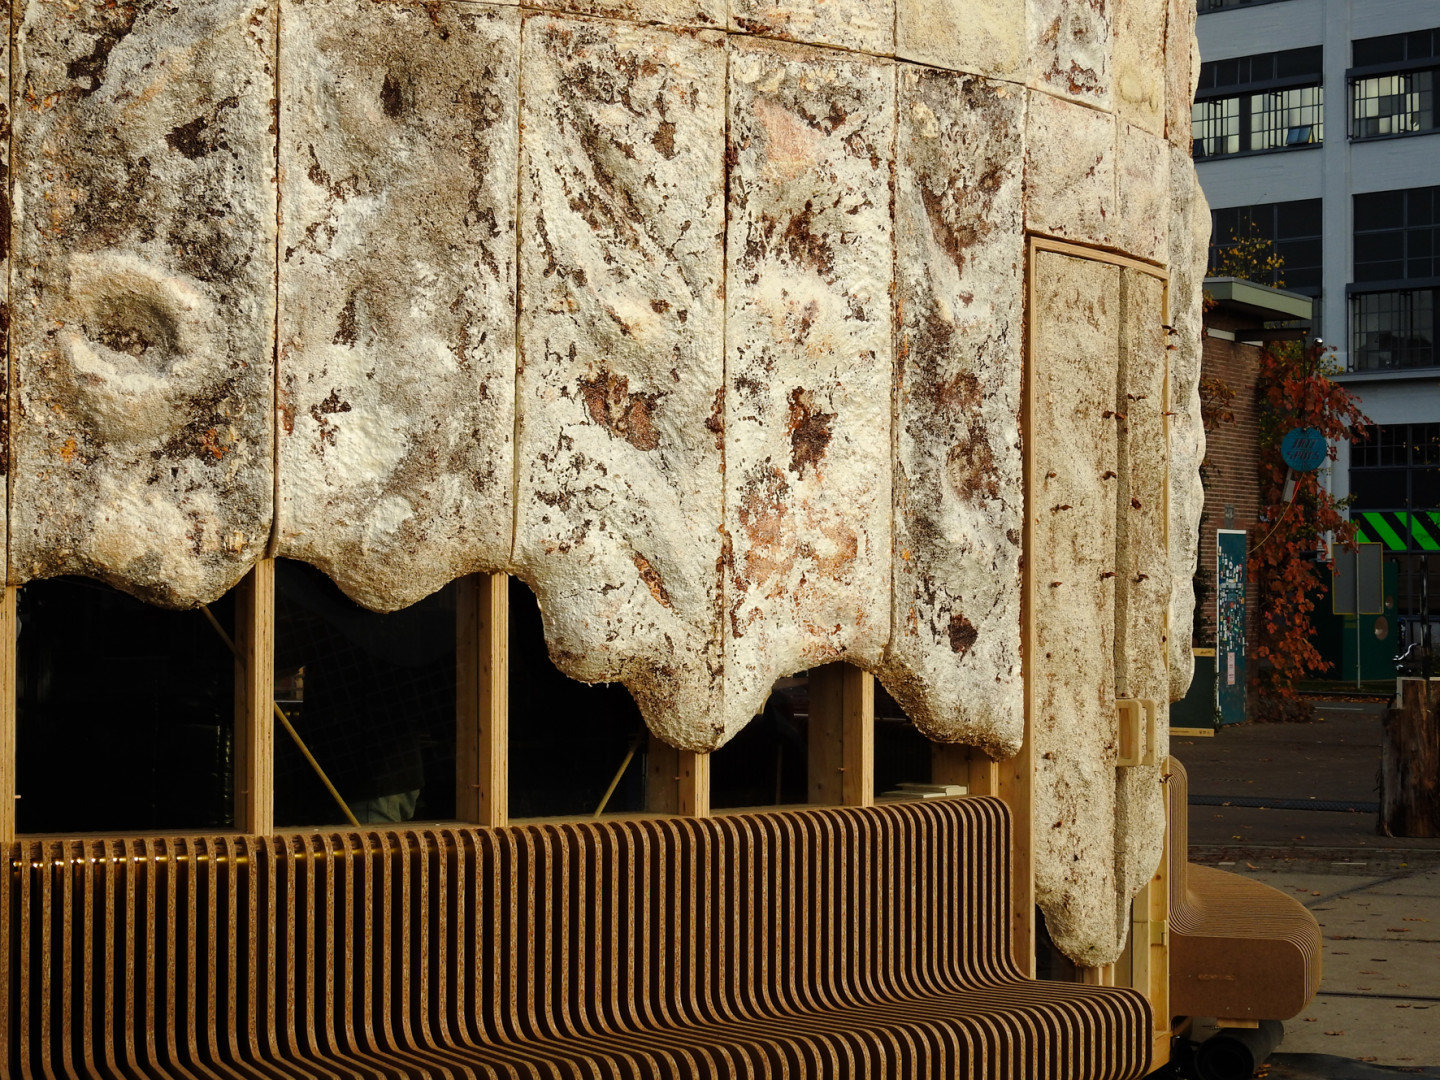 Facade of The Growing Pavilion is covered with mycelium panels designed by Krown.bio. The benches are made of rice straw ECO-Boards by Fiction Factory © Photos Eric Meander